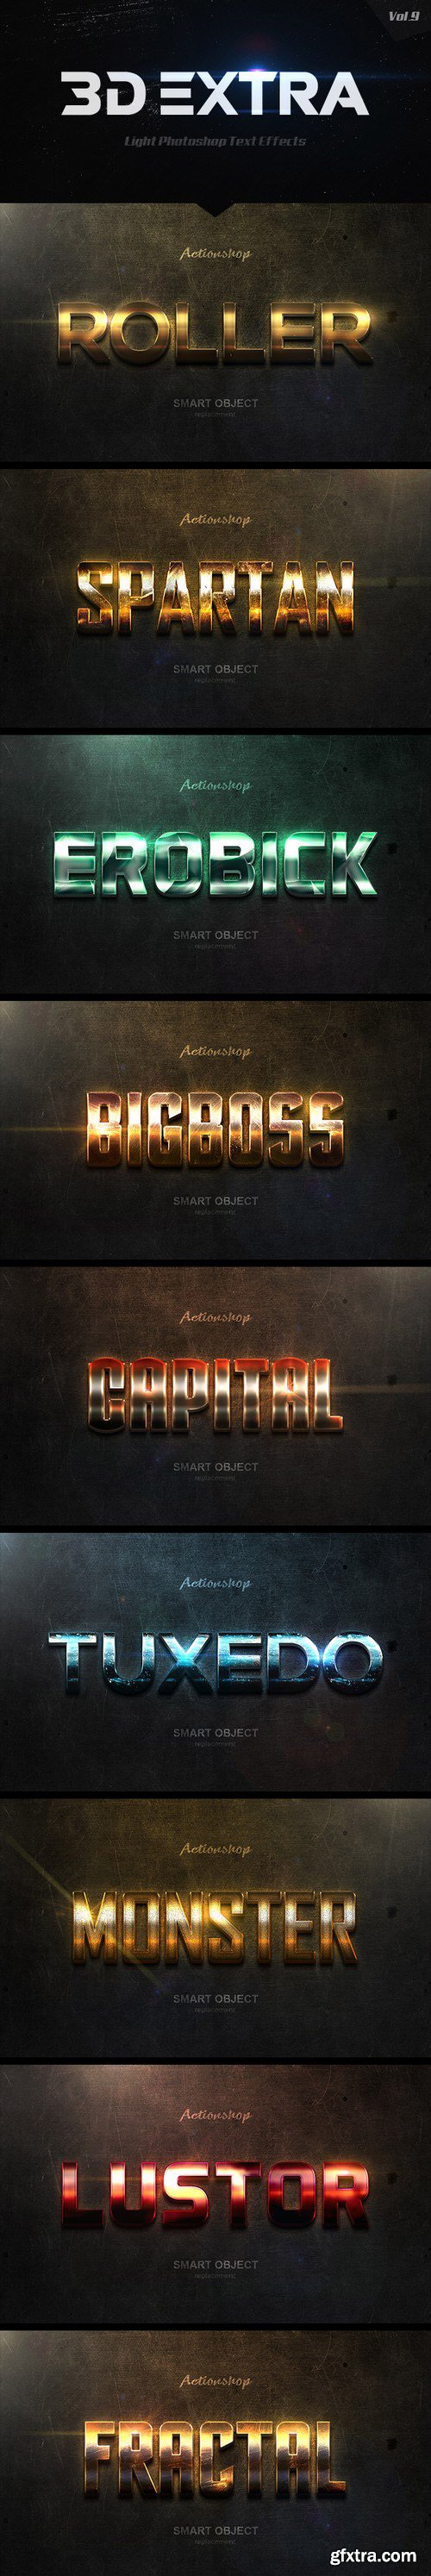 Graphicriver - New 3D Extra Light Text Effects Vol.9 20463668